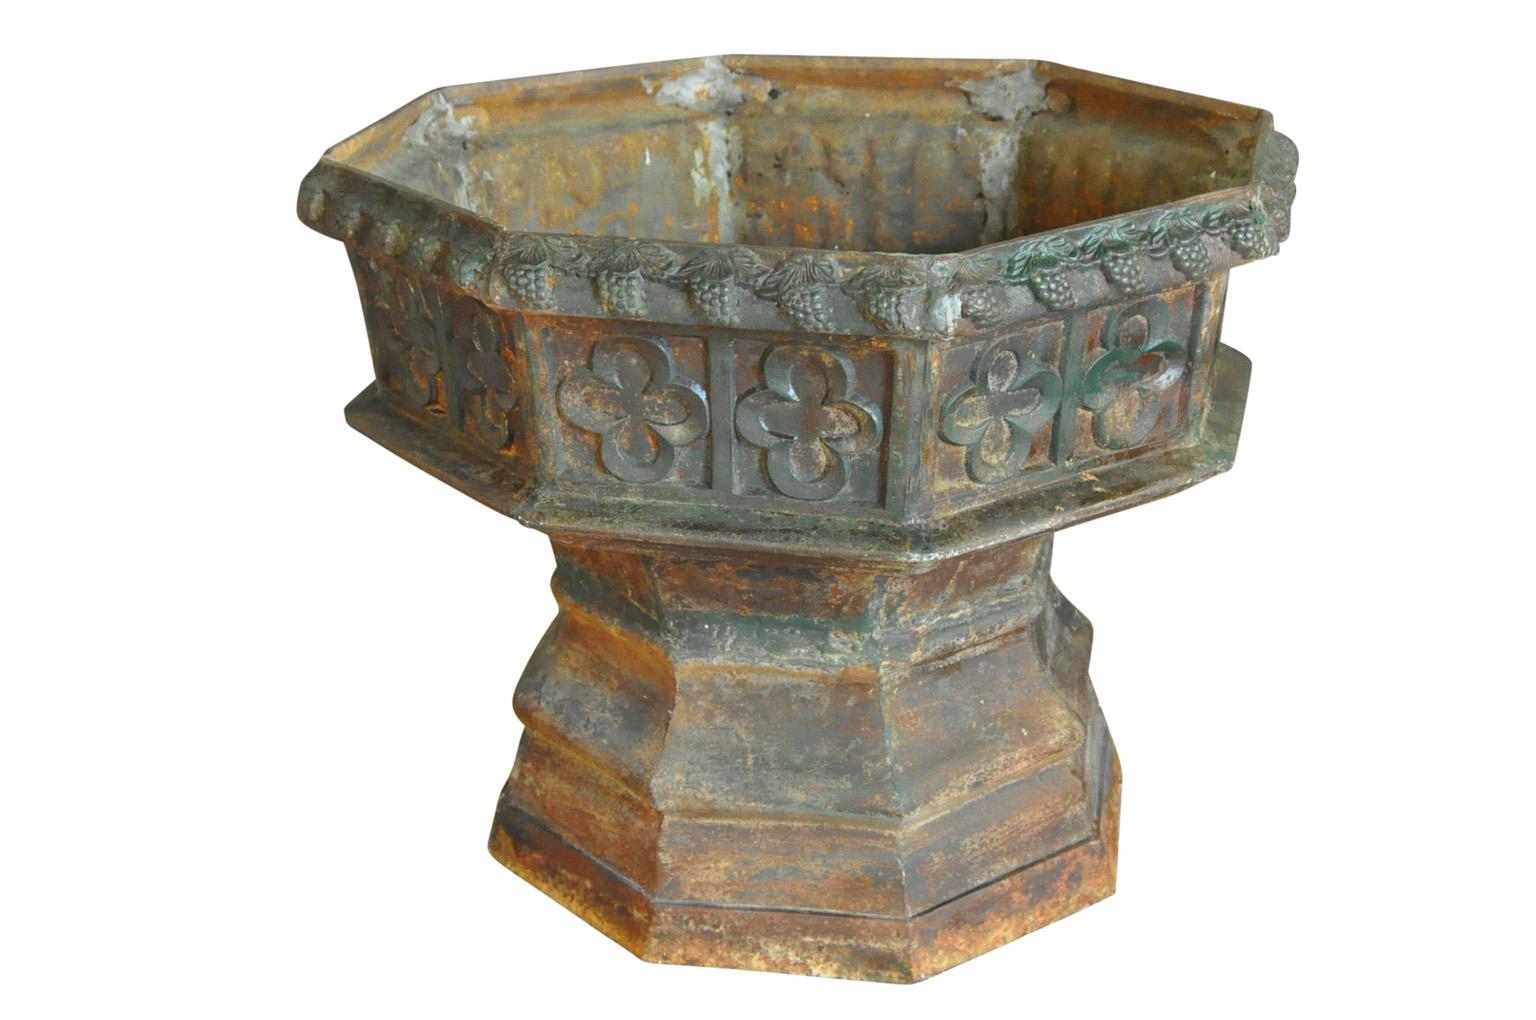 A monumental and fabulous jardinière from the South of France. Soundly crafted from cast iron with a wonderful grape bunch motif. Not only fabulous as a jardinière or planter, but would serve beautifully as a fountain base or as a base to a table.